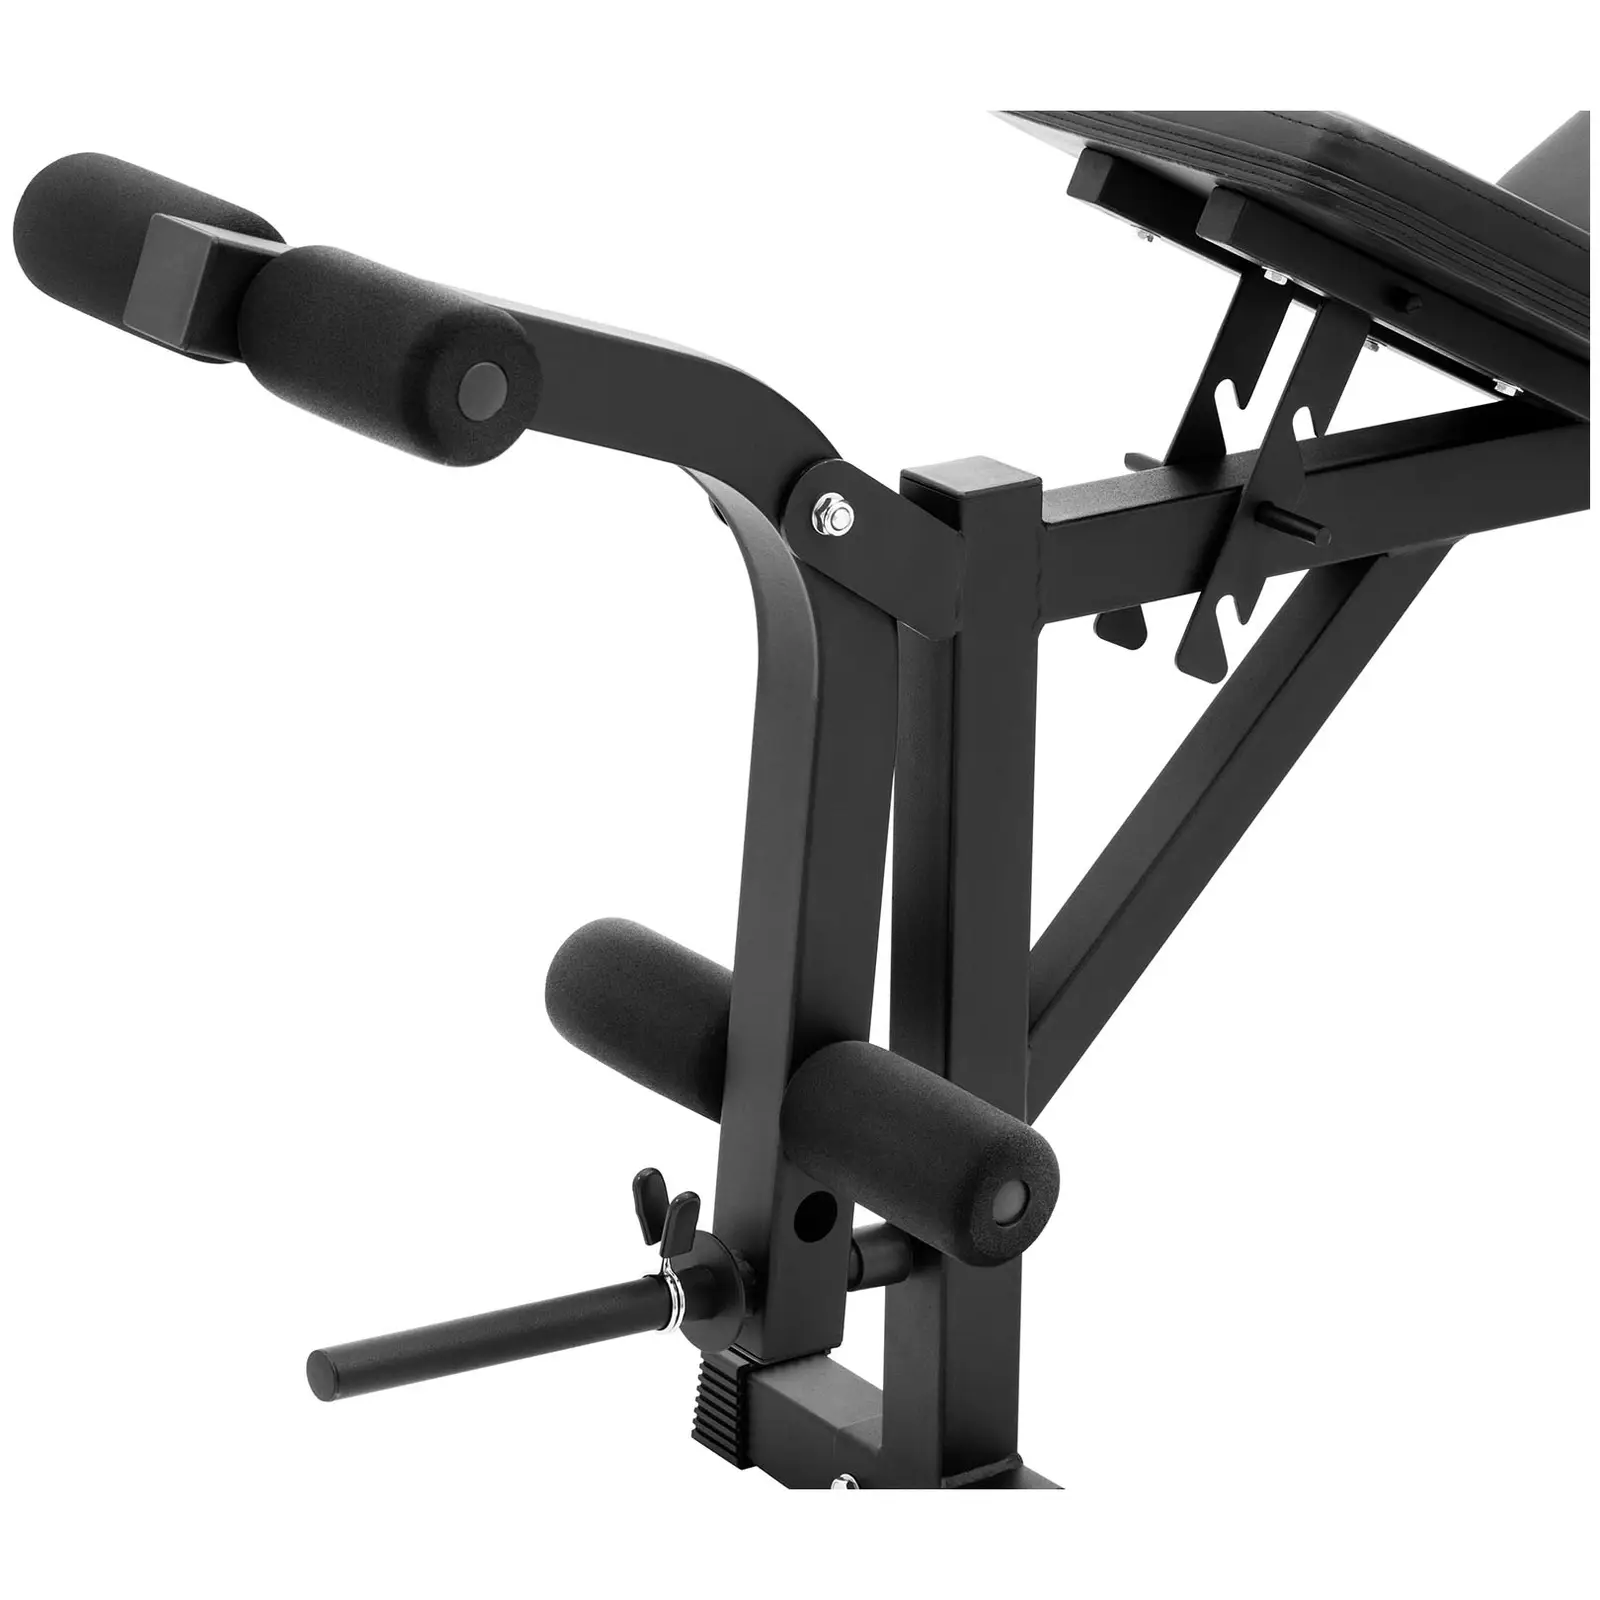 Multifunctional Weight Bench - supports up to 100 kg - adjustable - 180 - 152° inclination